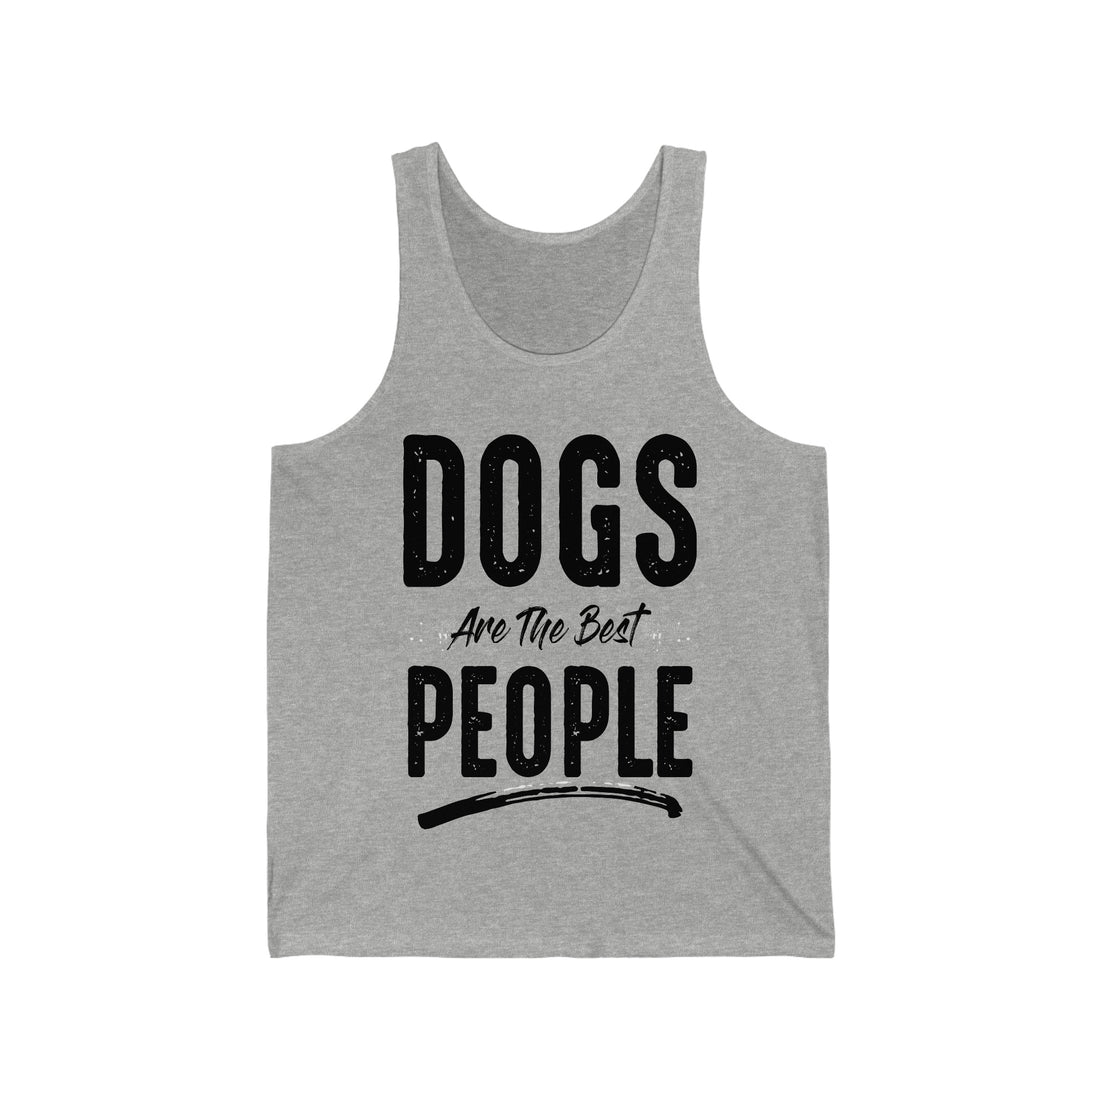 Dogs Are The Best People - Unisex Jersey Tank Top